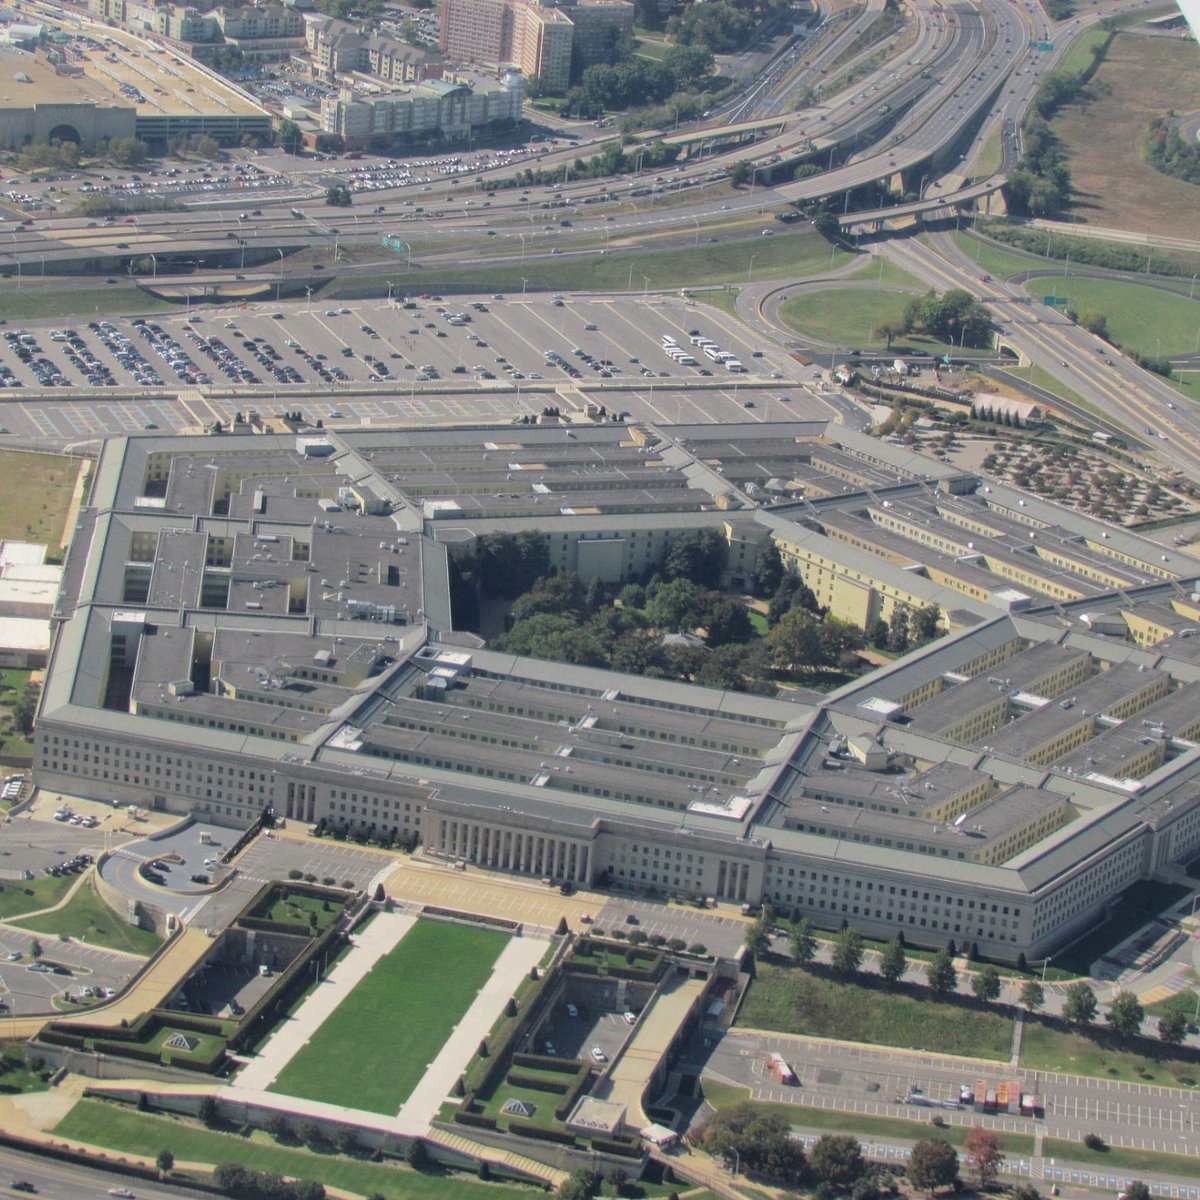 Albums 100+ Images the pentagon in washington dc is immense in size Full HD, 2k, 4k